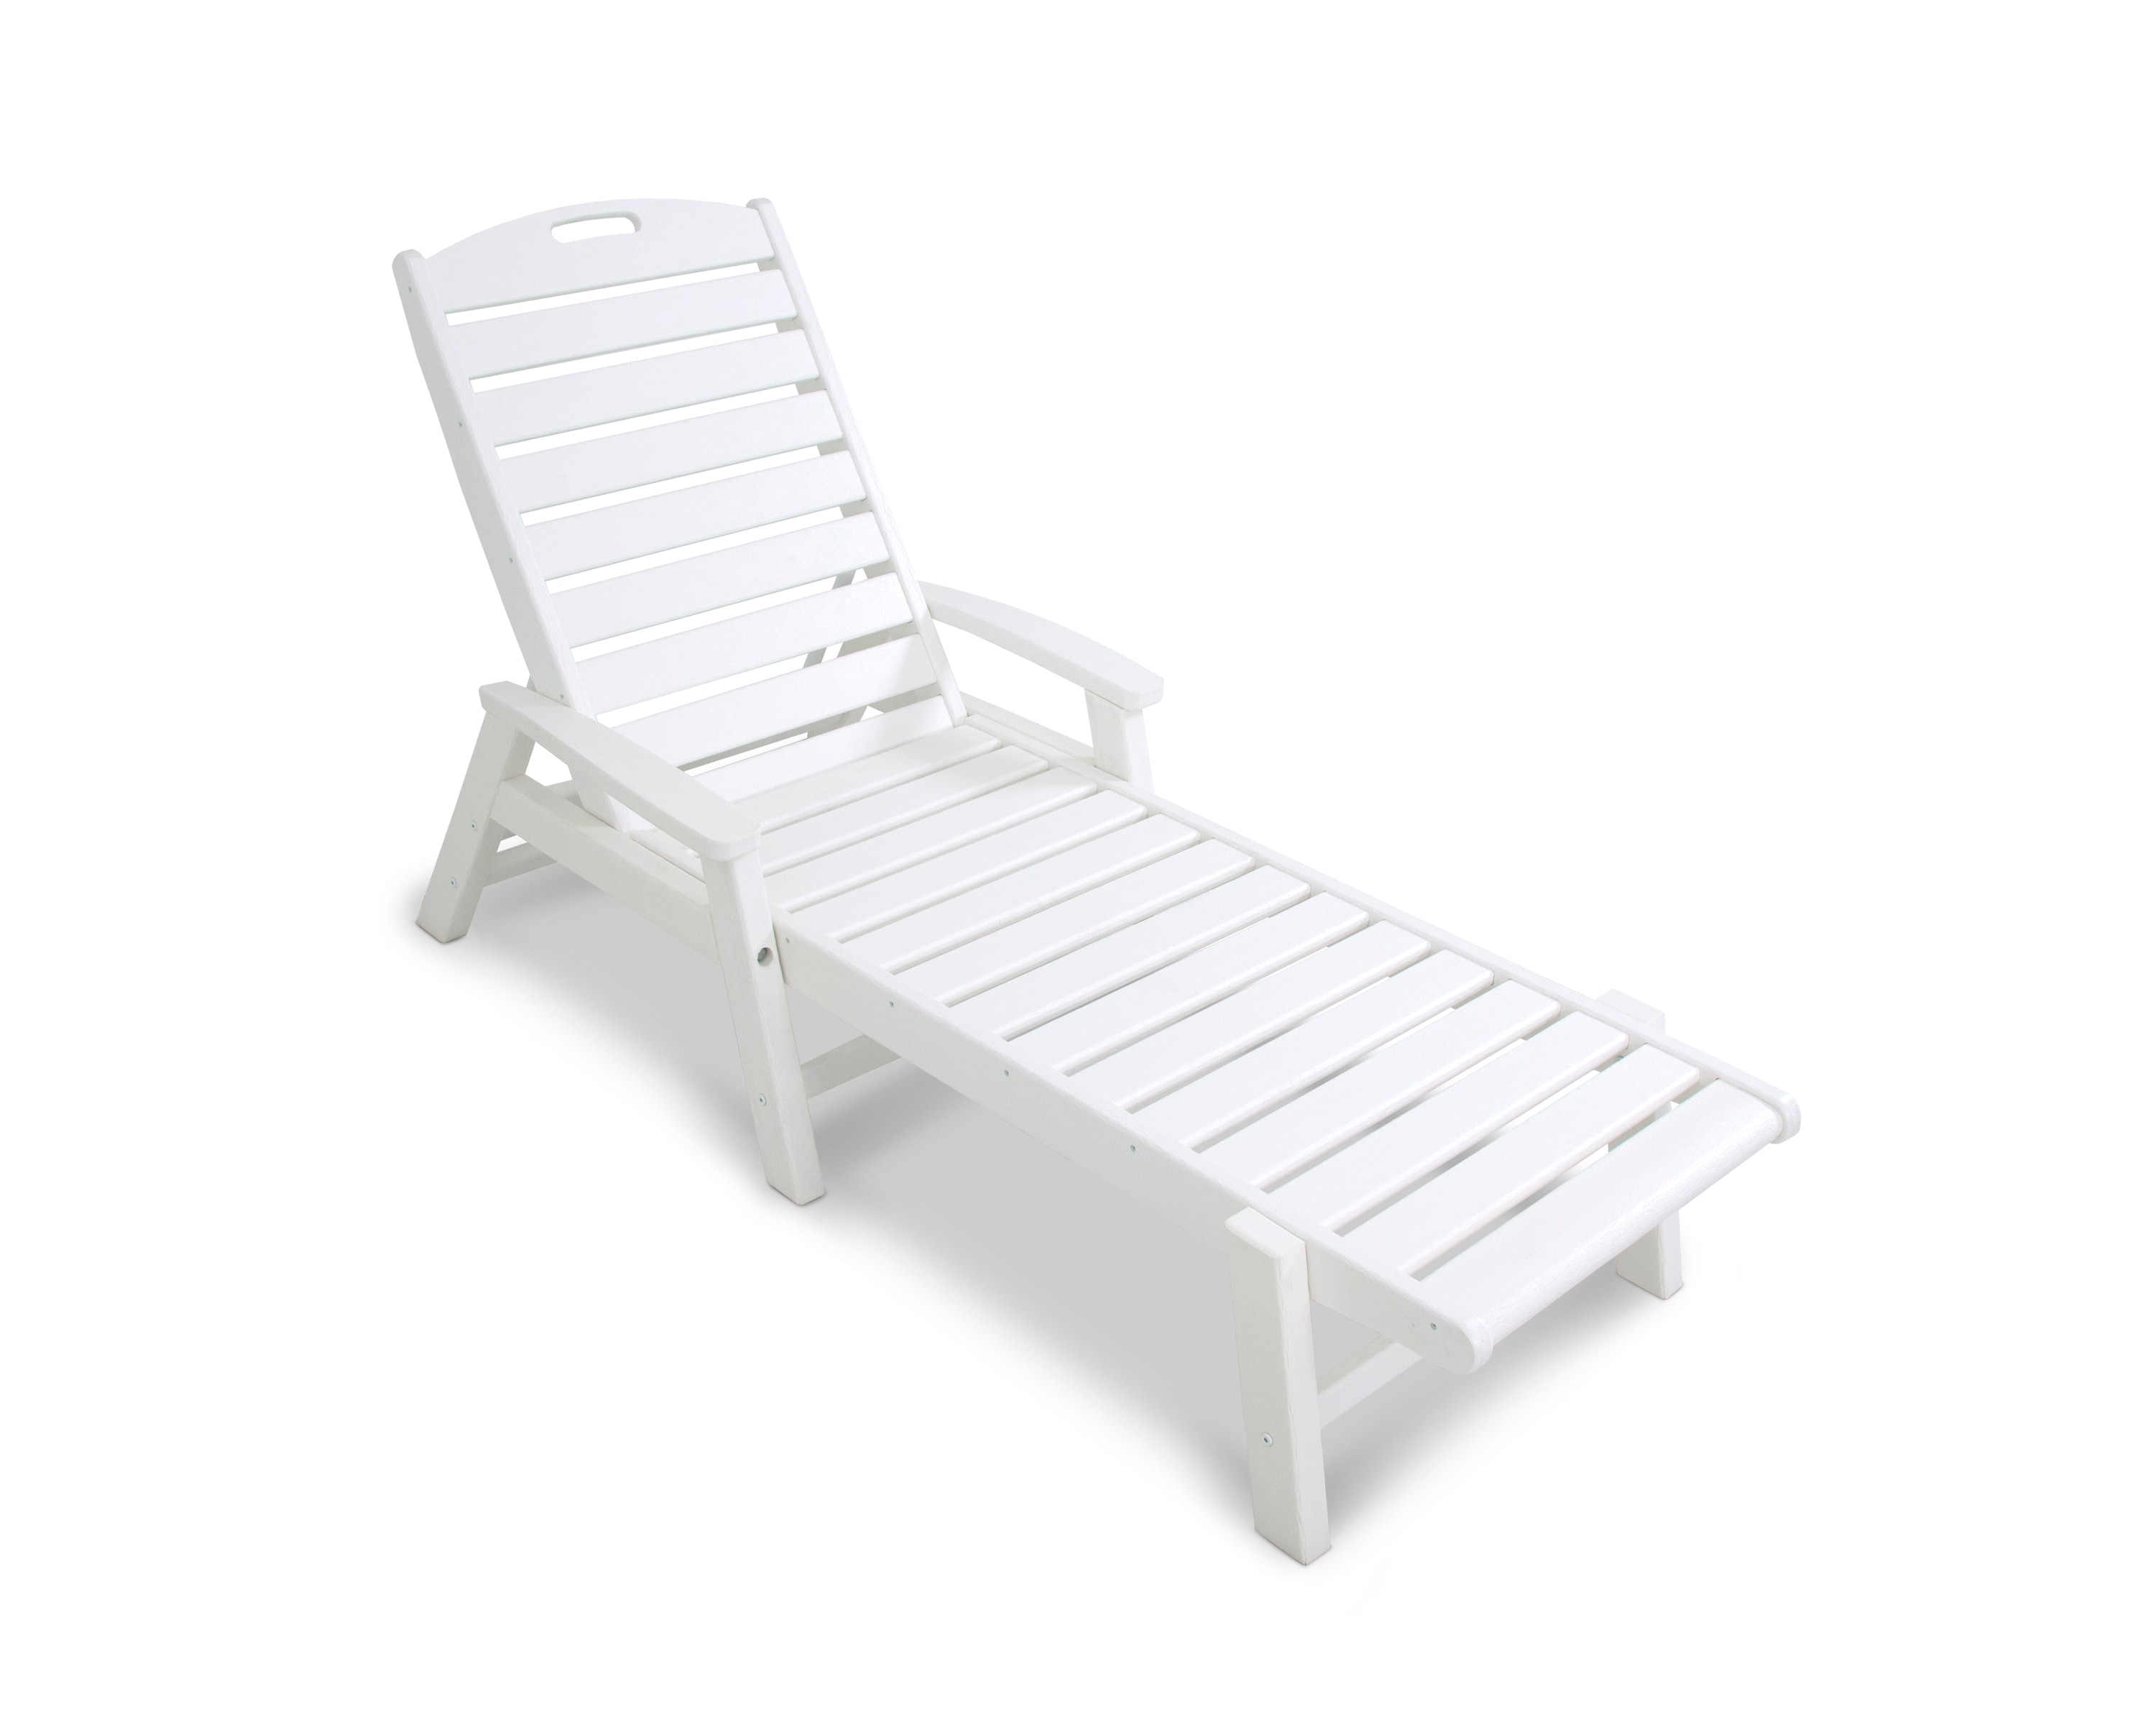 Trex Outdoor Furniture Yacht Club White Hdpe Frame Stationary Chaise Lounge Chairs With Slat 